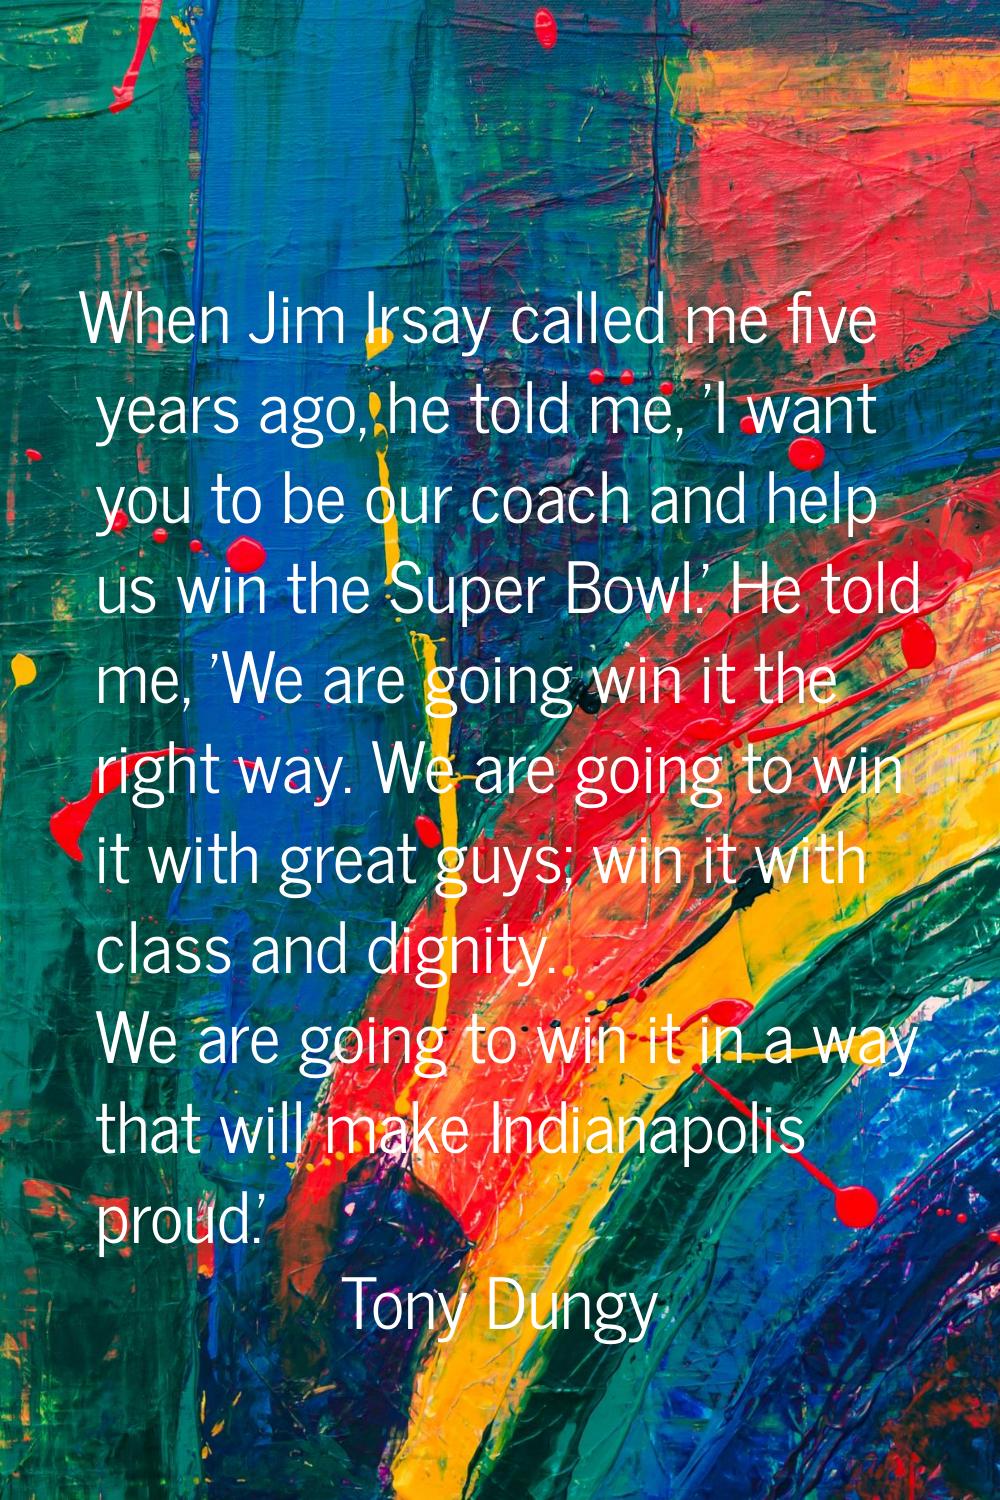 When Jim Irsay called me five years ago, he told me, 'I want you to be our coach and help us win th